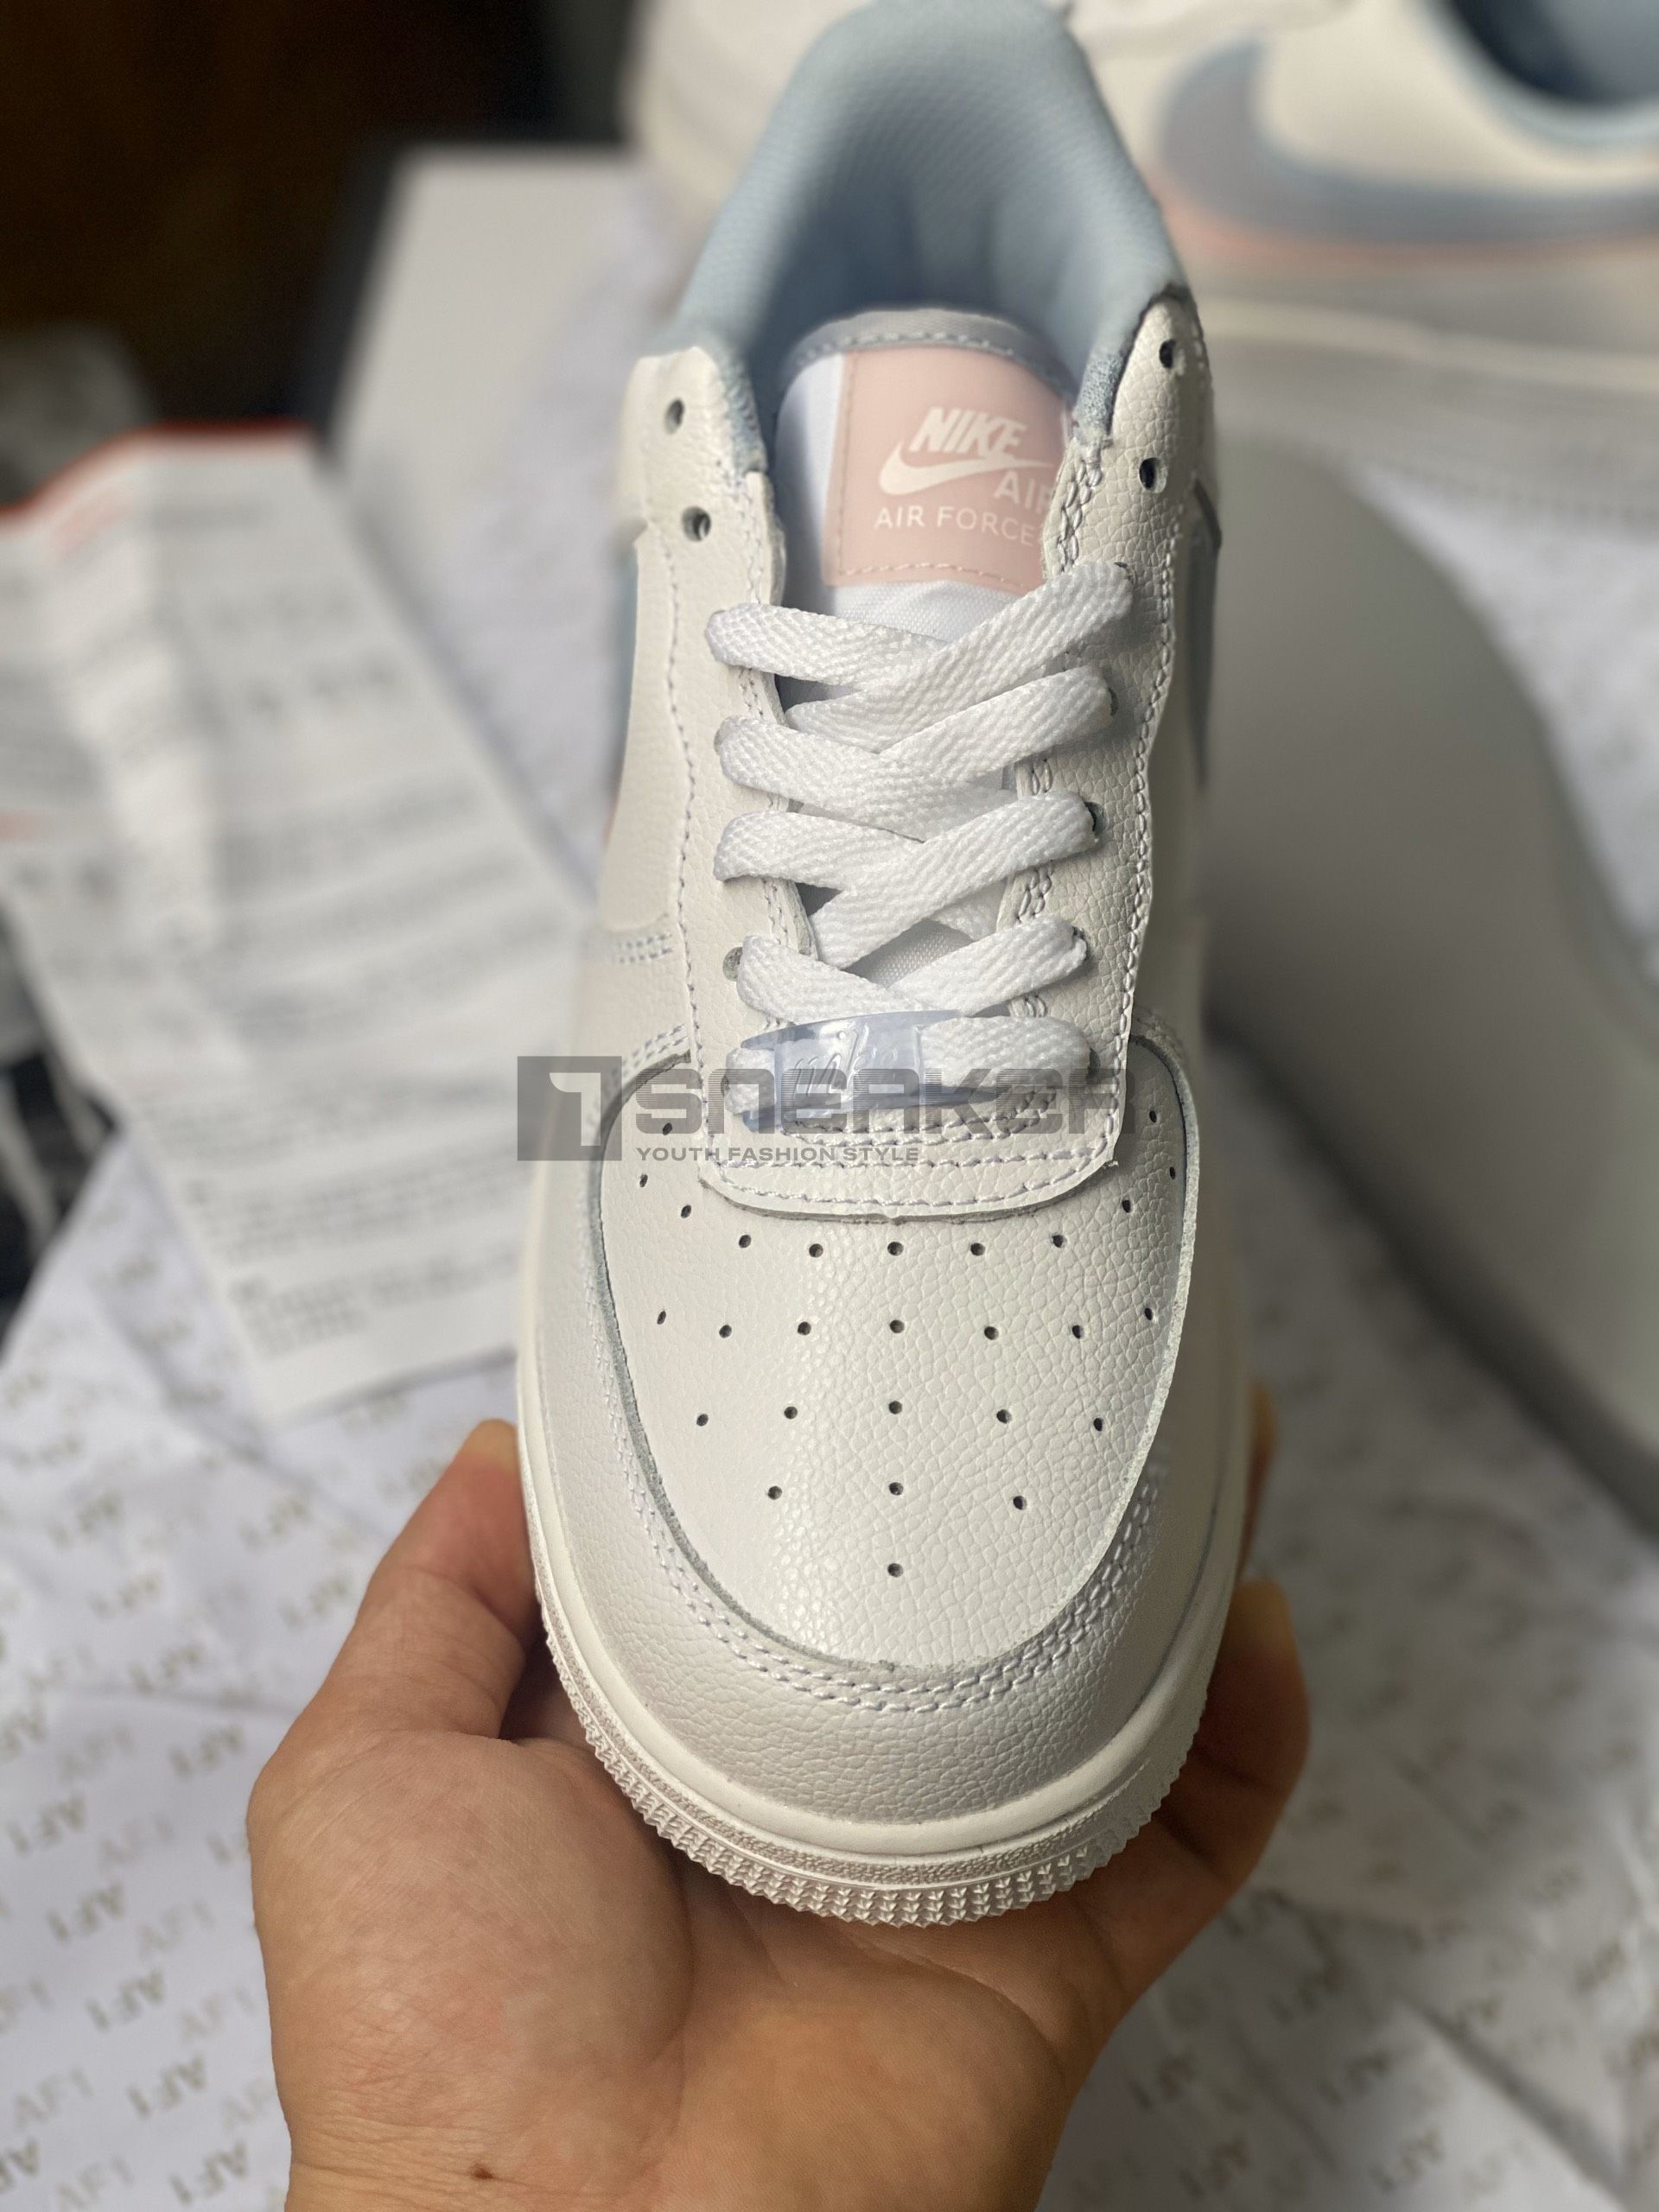 AIR FORCE 1 LOW LV8 GS DOUBLE SWOOSH NIKE Hong Baby 3